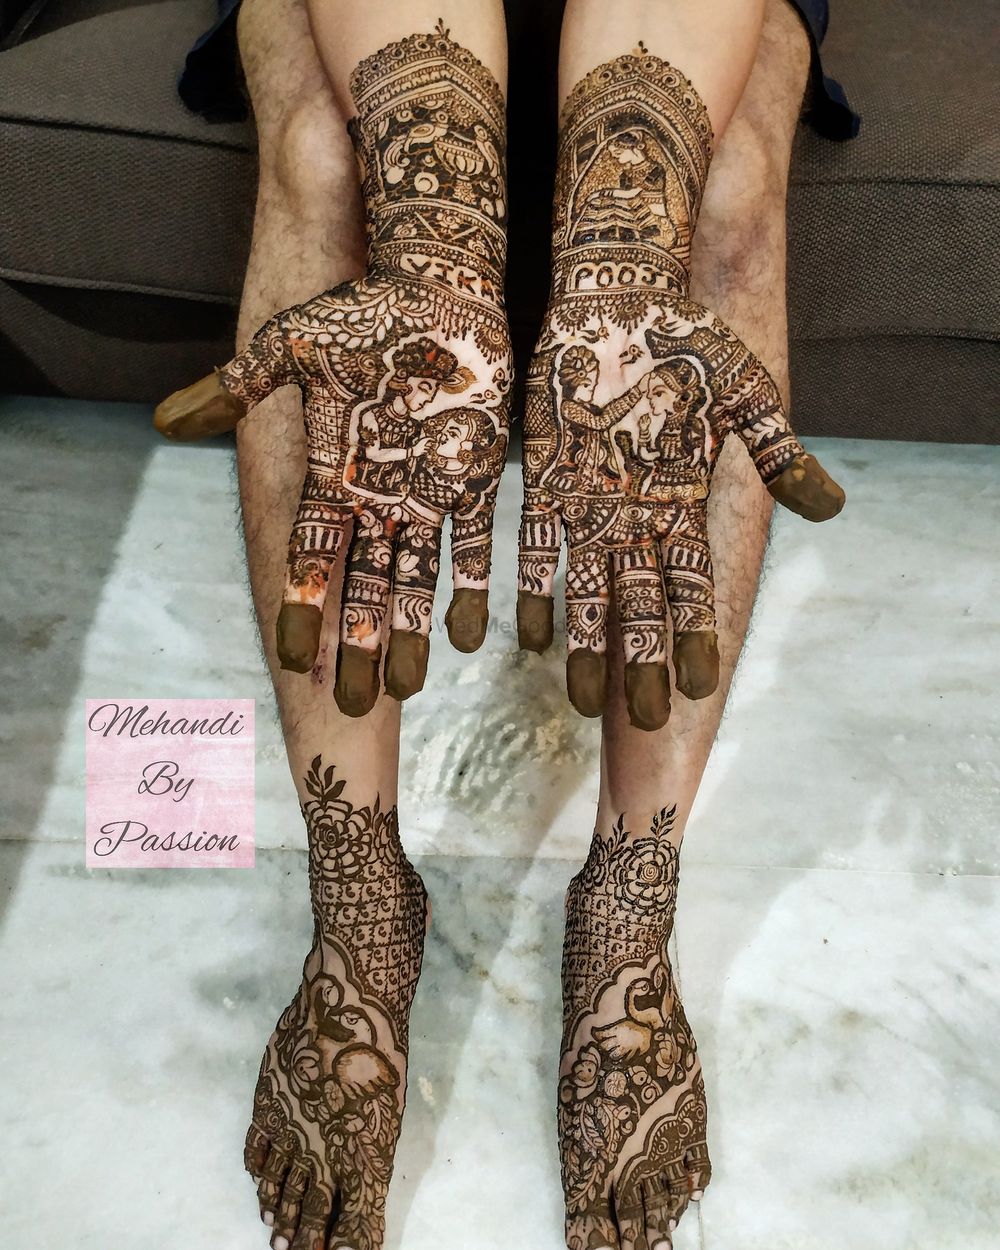 Photo From bridal - By Mehandi by Passions